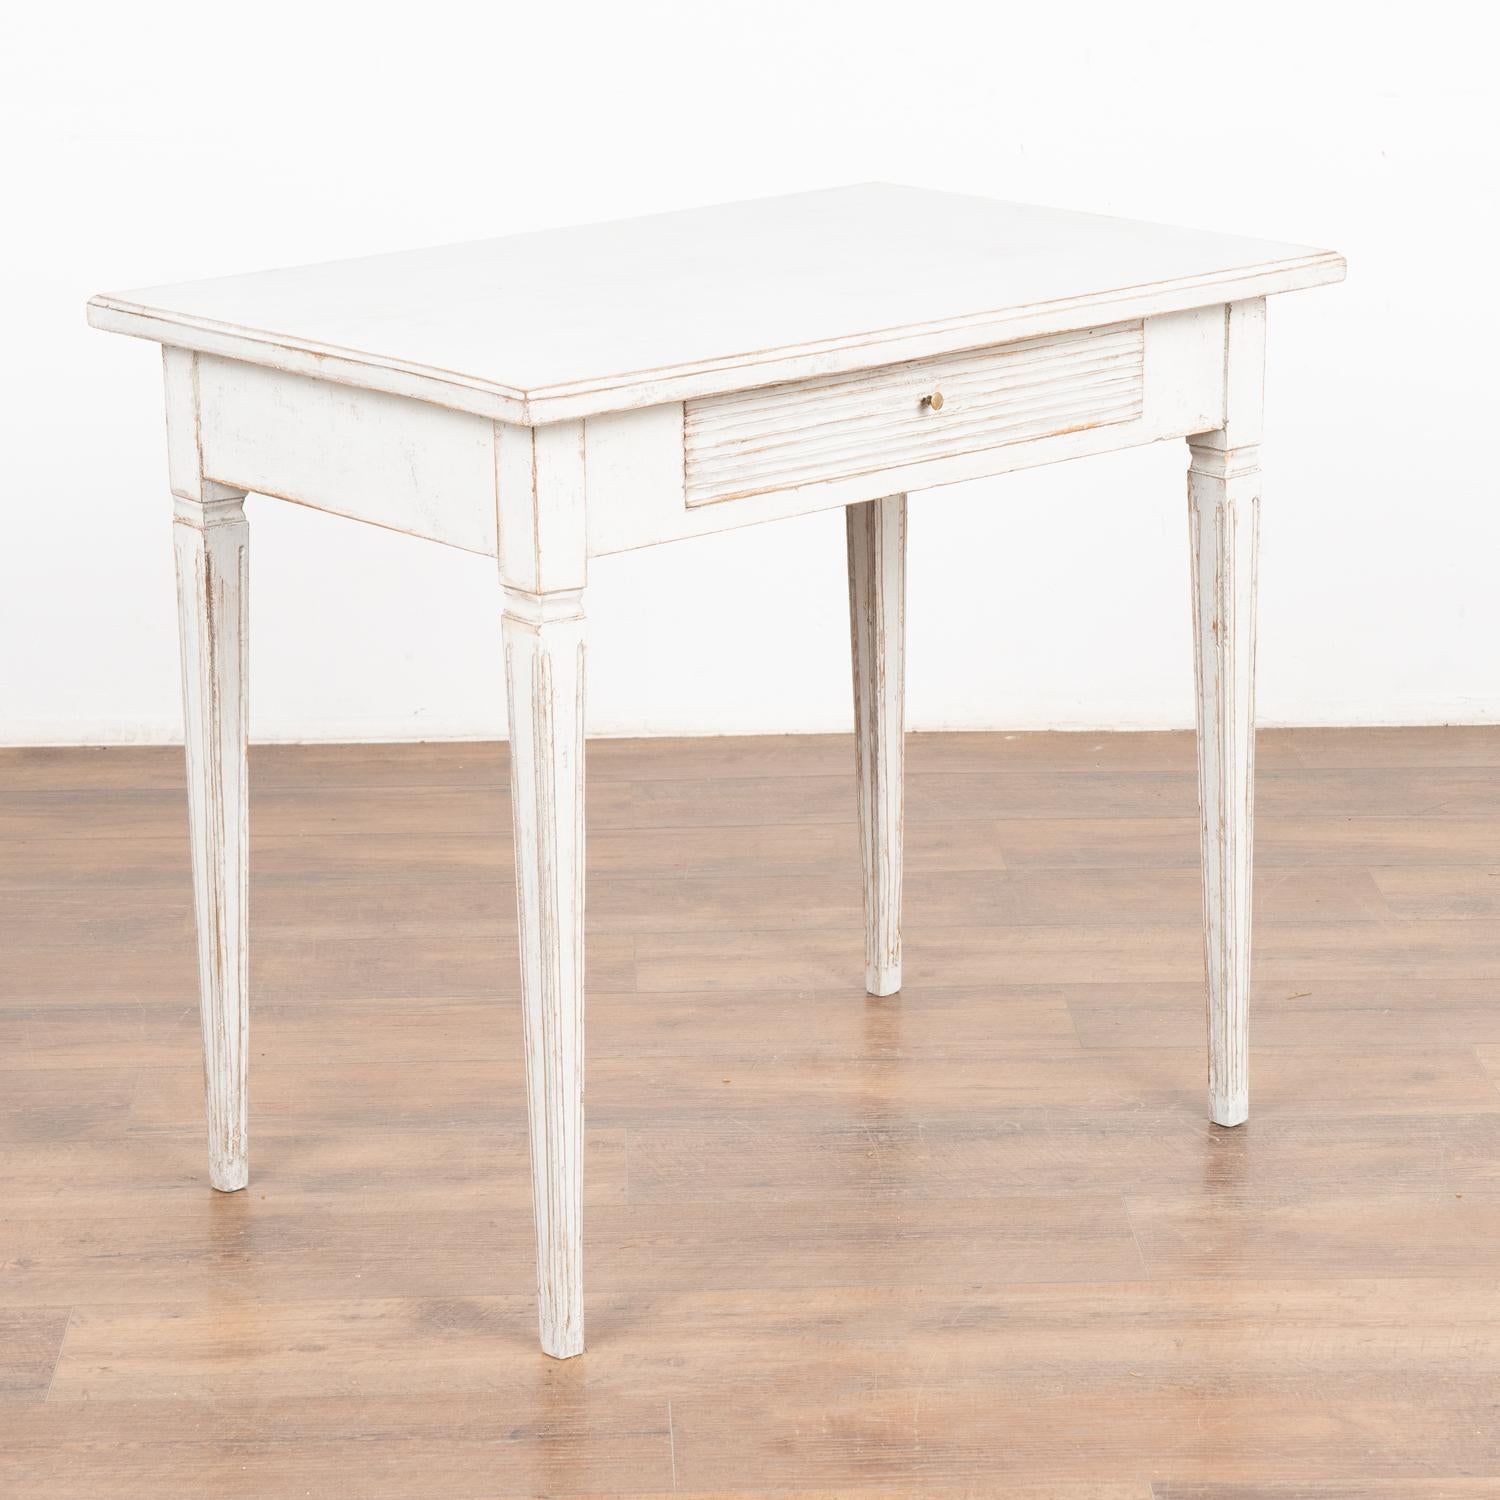 Antique Swedish Gustavian White Painted Side Table With Drawer.
Tapered legs and horizontal fluted carving along single drawer. May also serve as nightstand.
Restored, later professionally applied white painted layered finish lightly distressed to